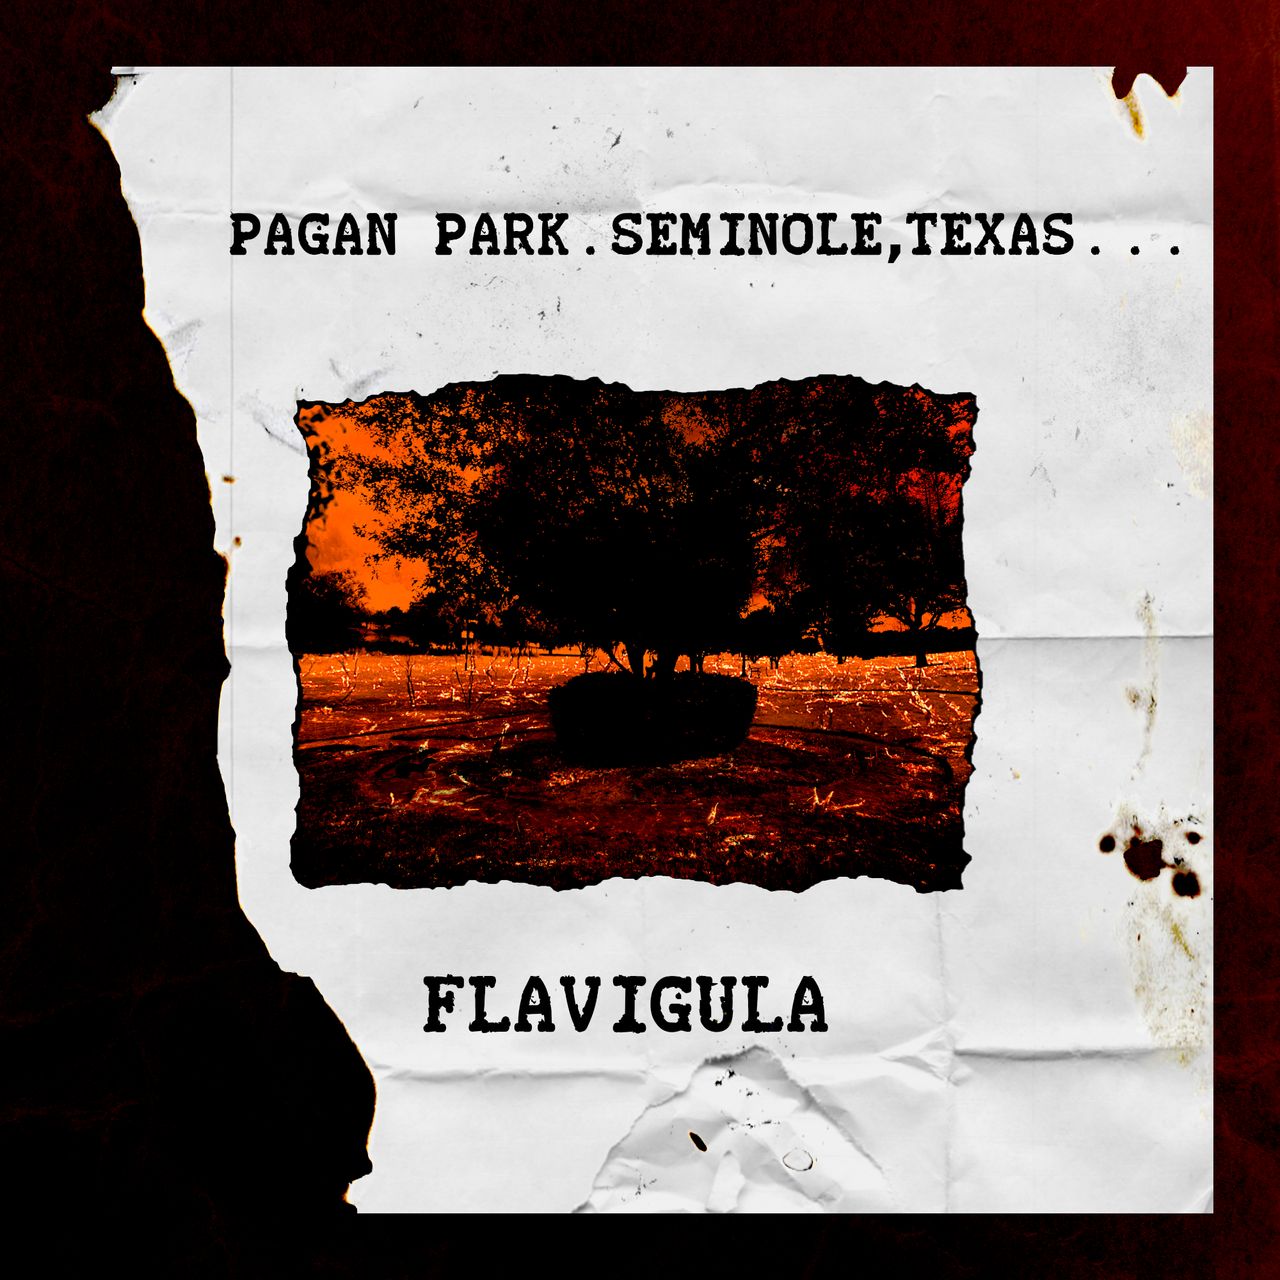 A scorched parchment depicting a park in flames framed by Flavigula and the album title